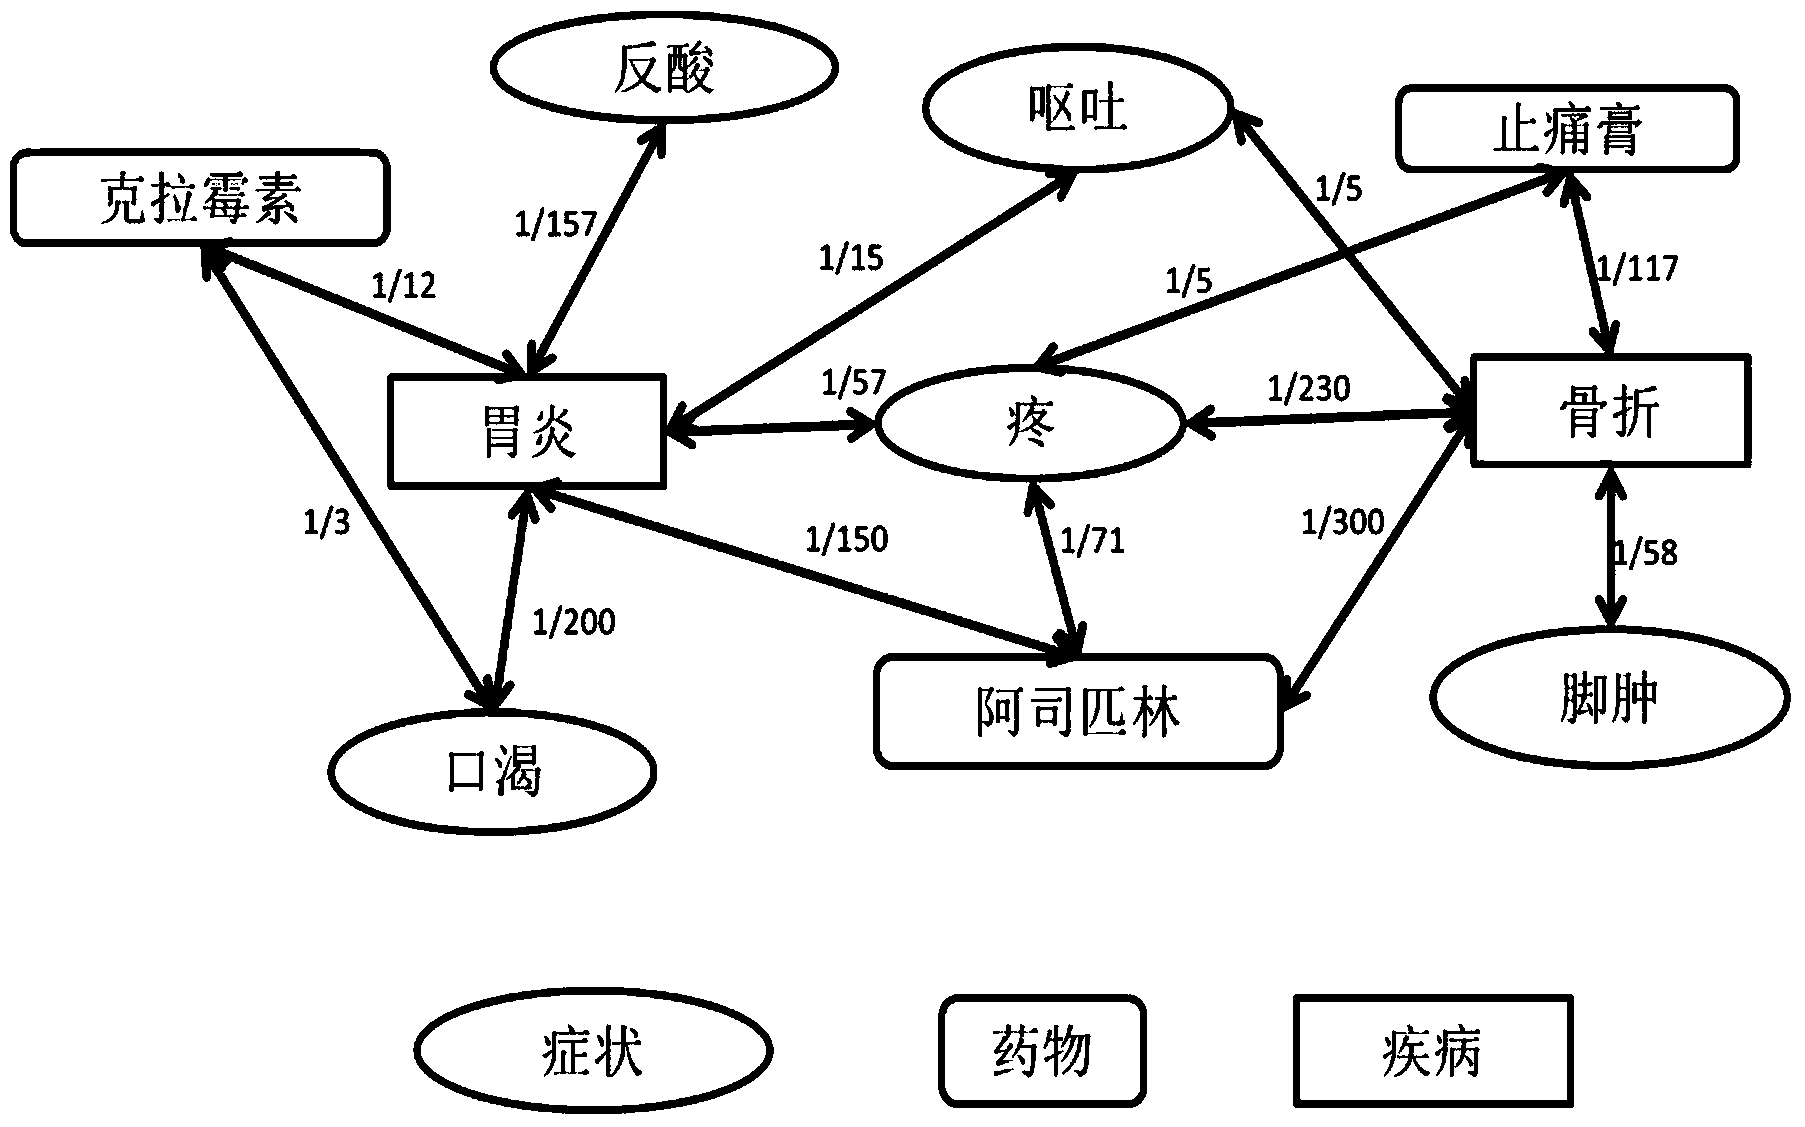 Online knowledge map based on named entity library